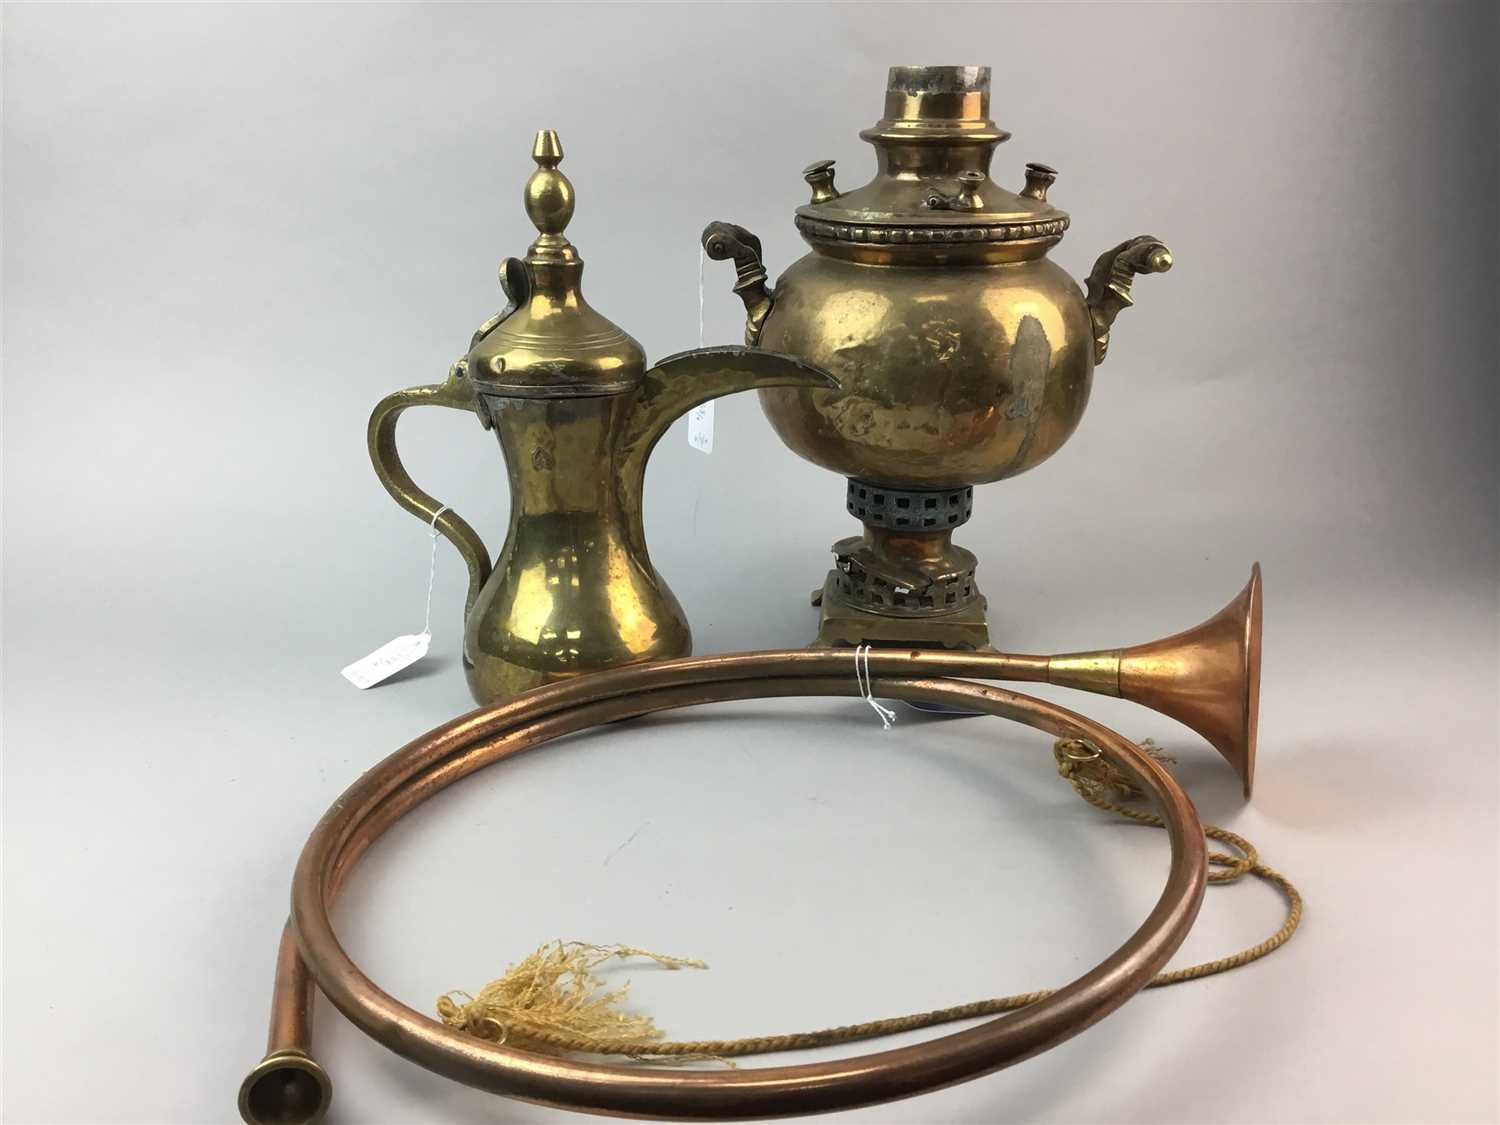 Lot 138 - A COPPER AND BRASS HUNTING HORN, BRASS LAMP, JUG AND A BRASS WARMER